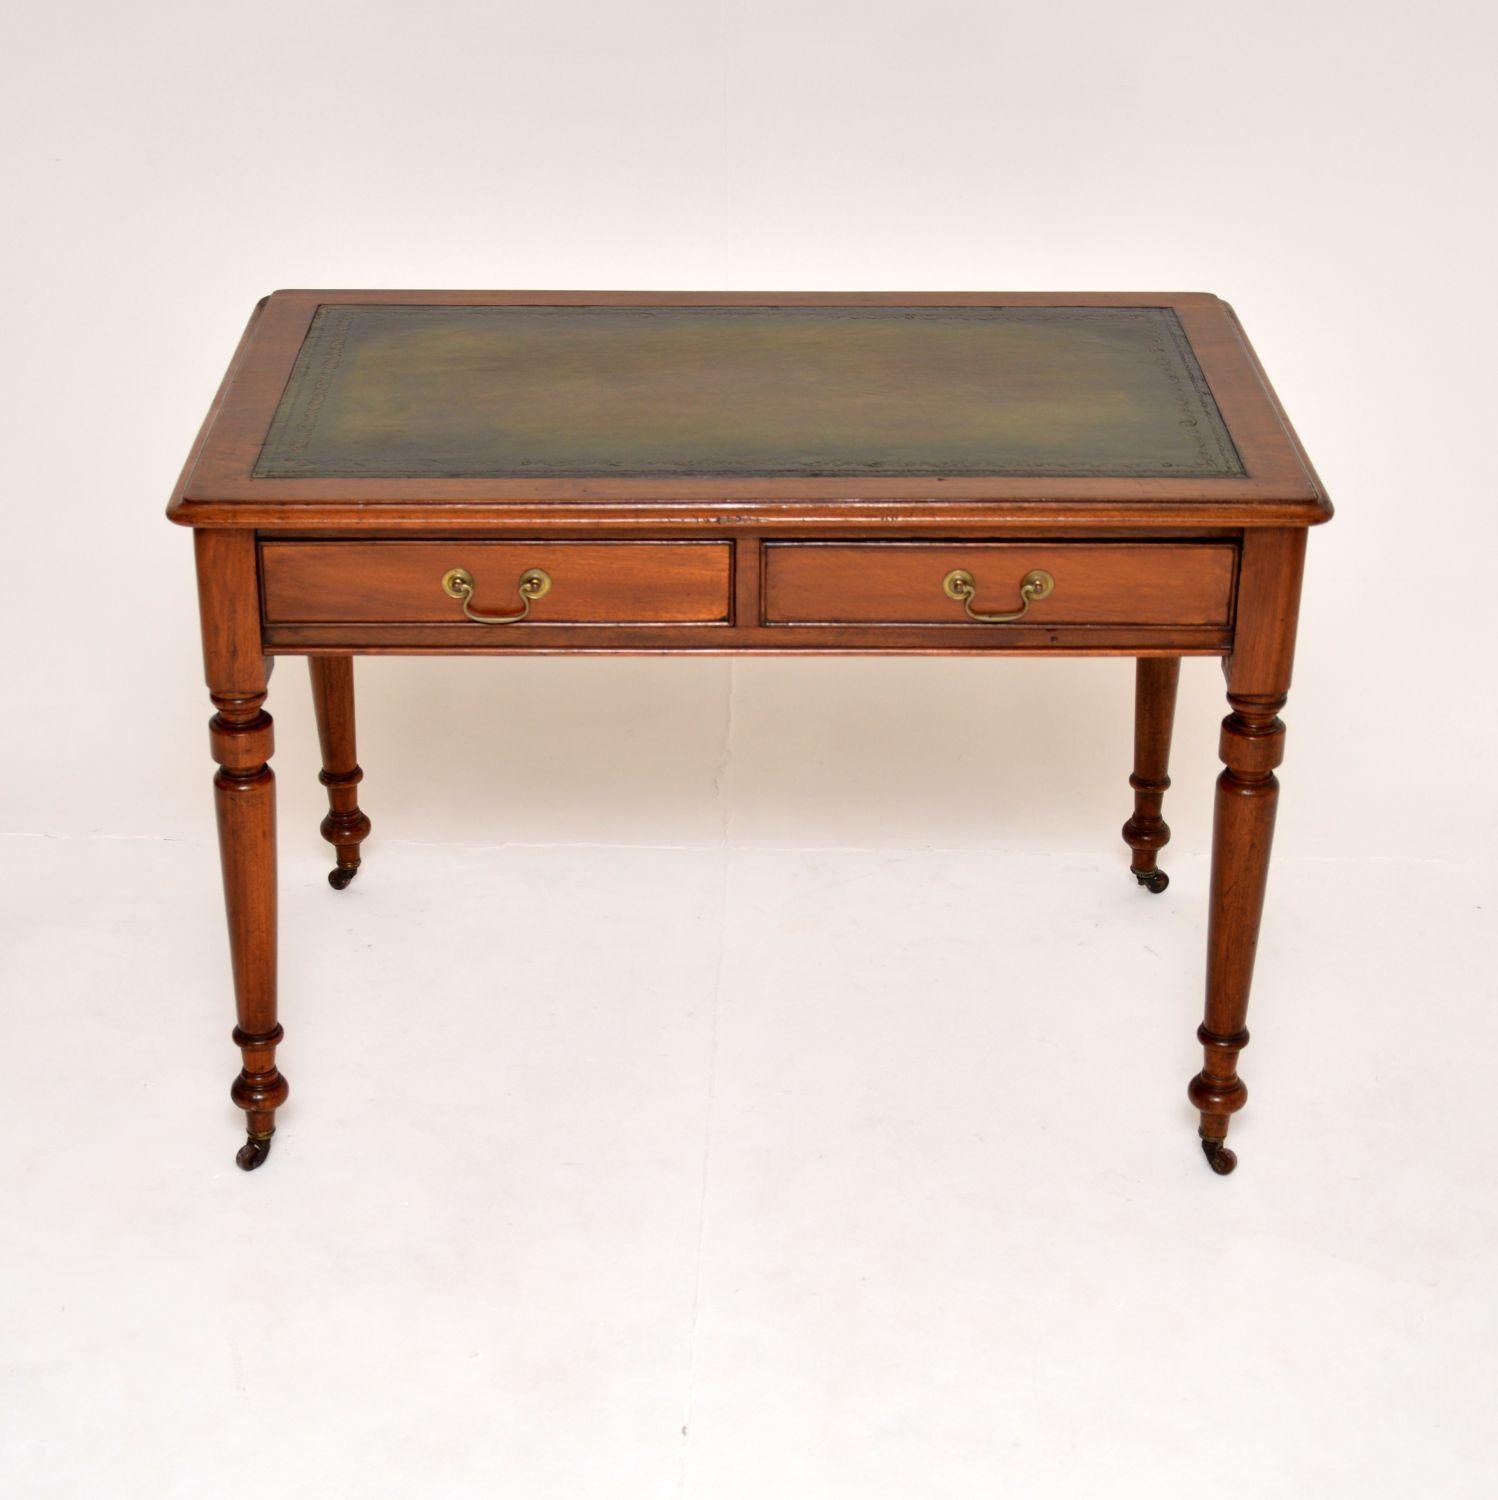 A very fine quality antique Victorian writing desk. This was made in England, it dates from the 1880-1890 period.
It is very well made and is a useful size, with a polished back so it can be used as a free standing item. It sits on finely turned